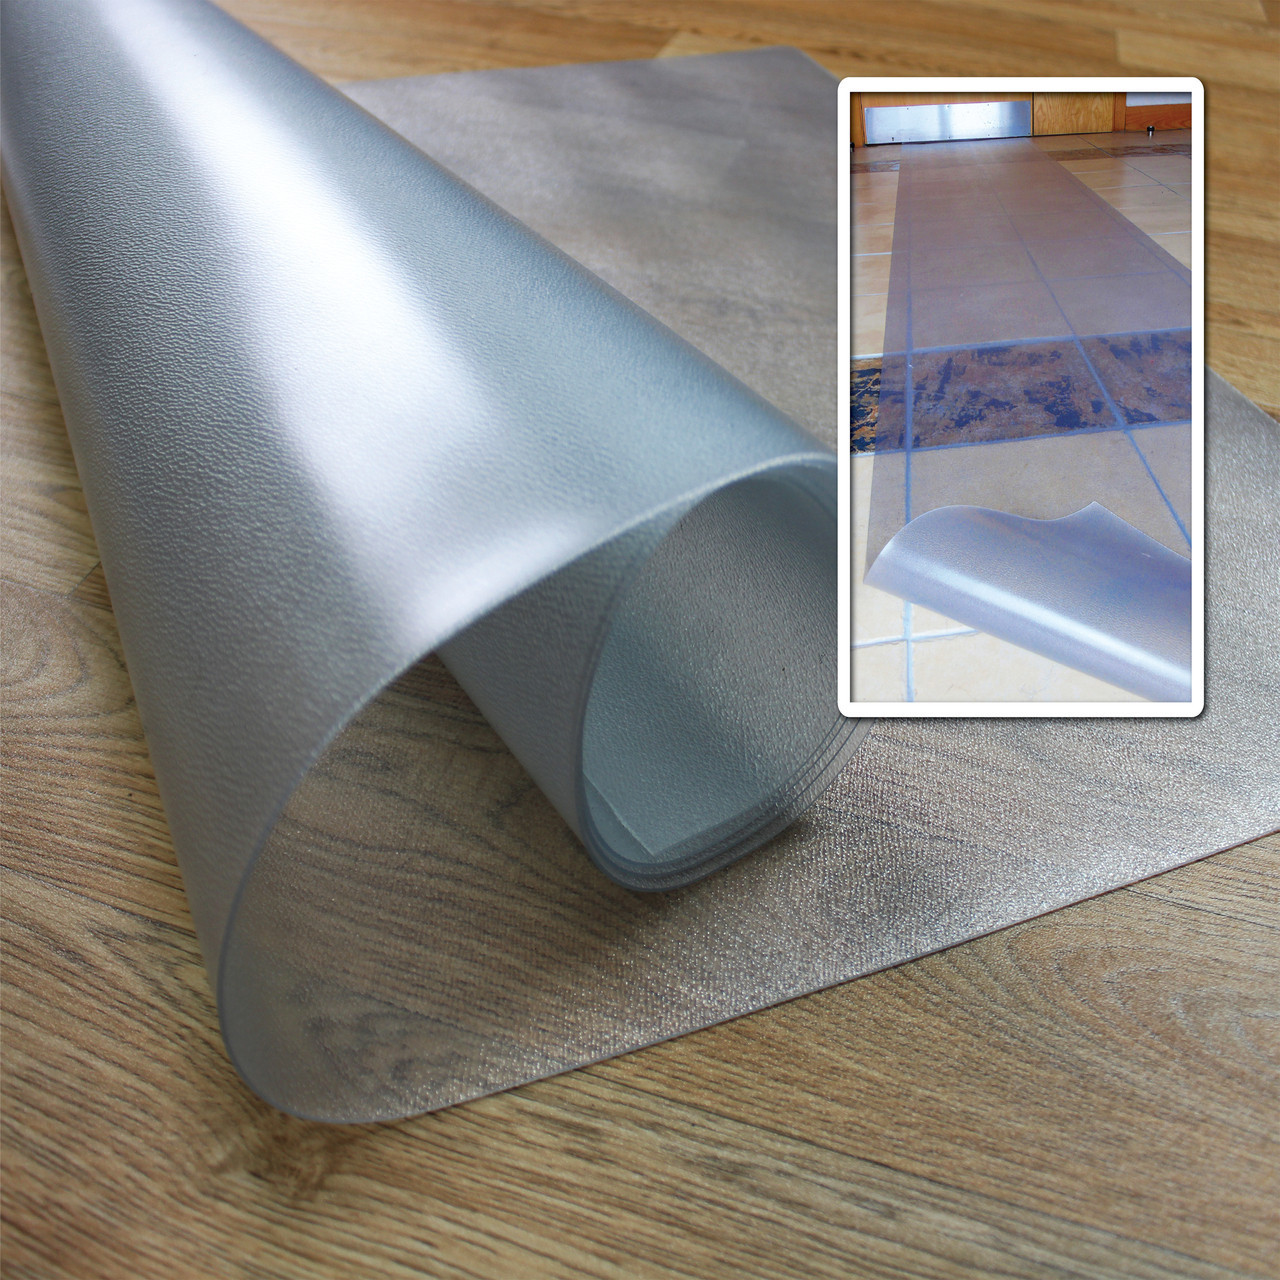 https://cdn11.bigcommerce.com/s-fjwps1jbkv/images/stencil/1280x1280/products/197/2961/floortex-long-and-strong-hallway-runner-or-clear-pvc-surface-protector-roll-mat-for-very-low-pile-carpets-and-hard-floors-or-multiple-sizes__17913.1688987318.jpg?c=2?imbypass=on